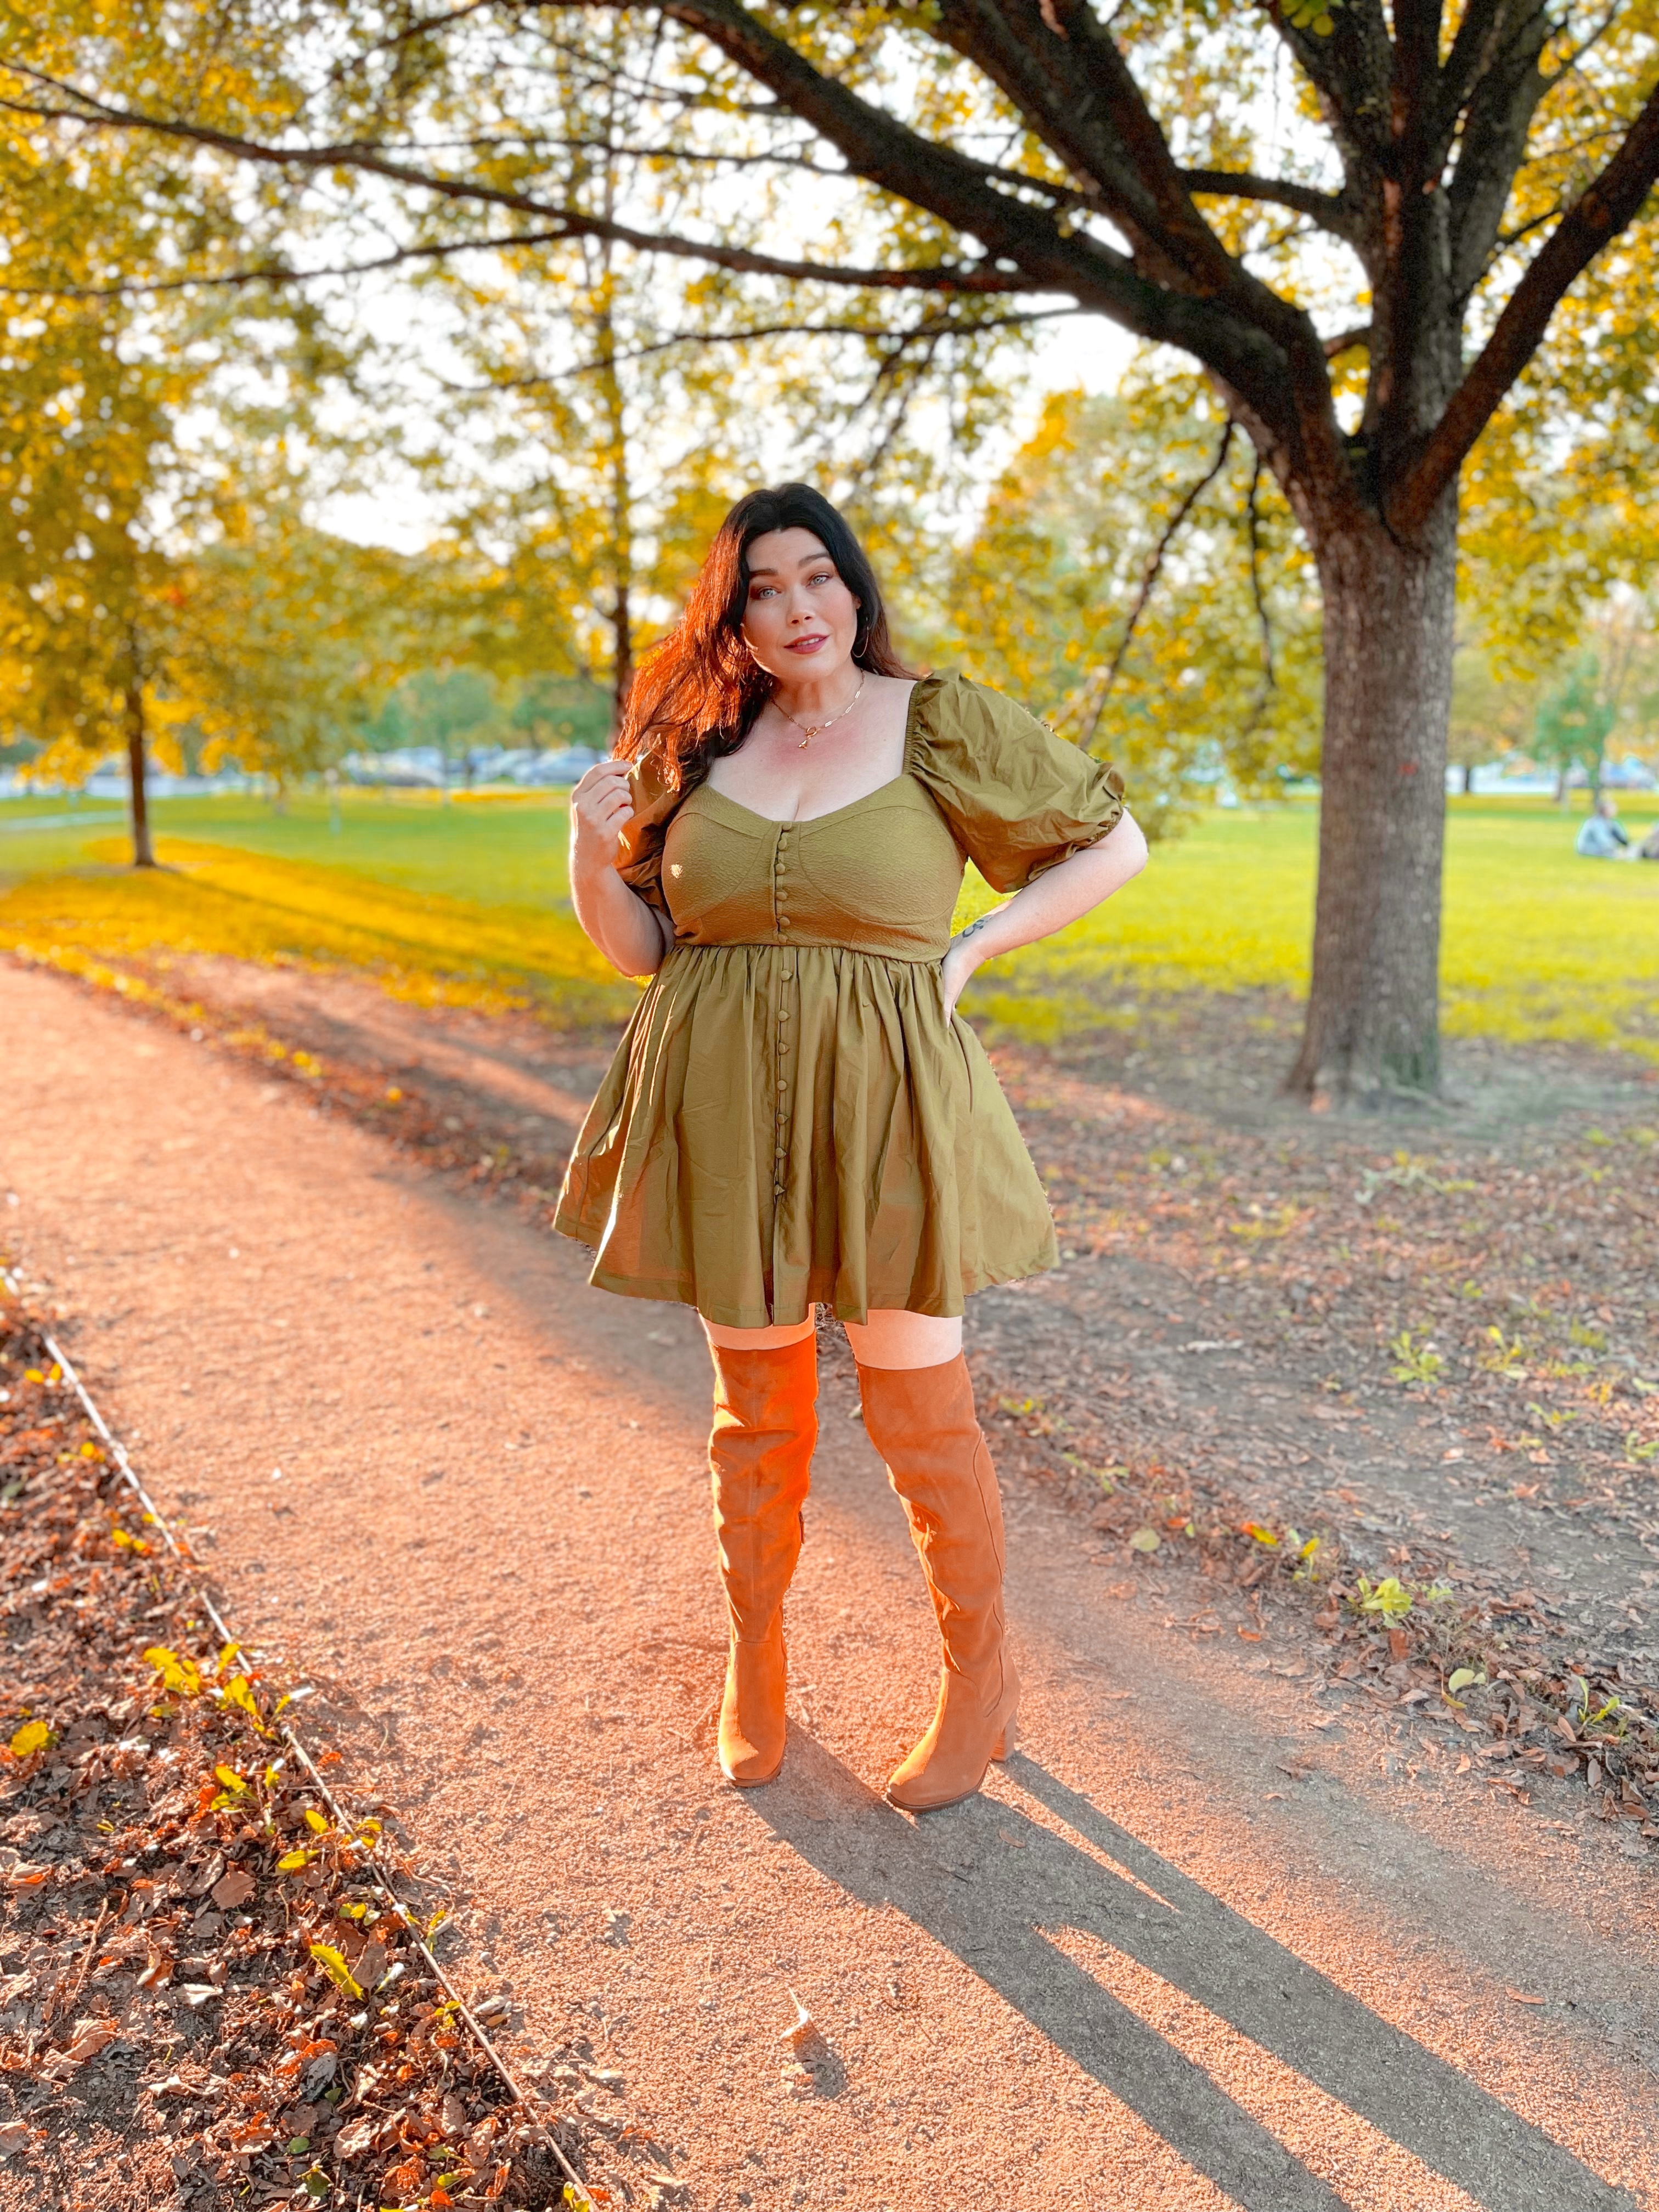 Green Plus Size Babydoll Dress with OTK Boots